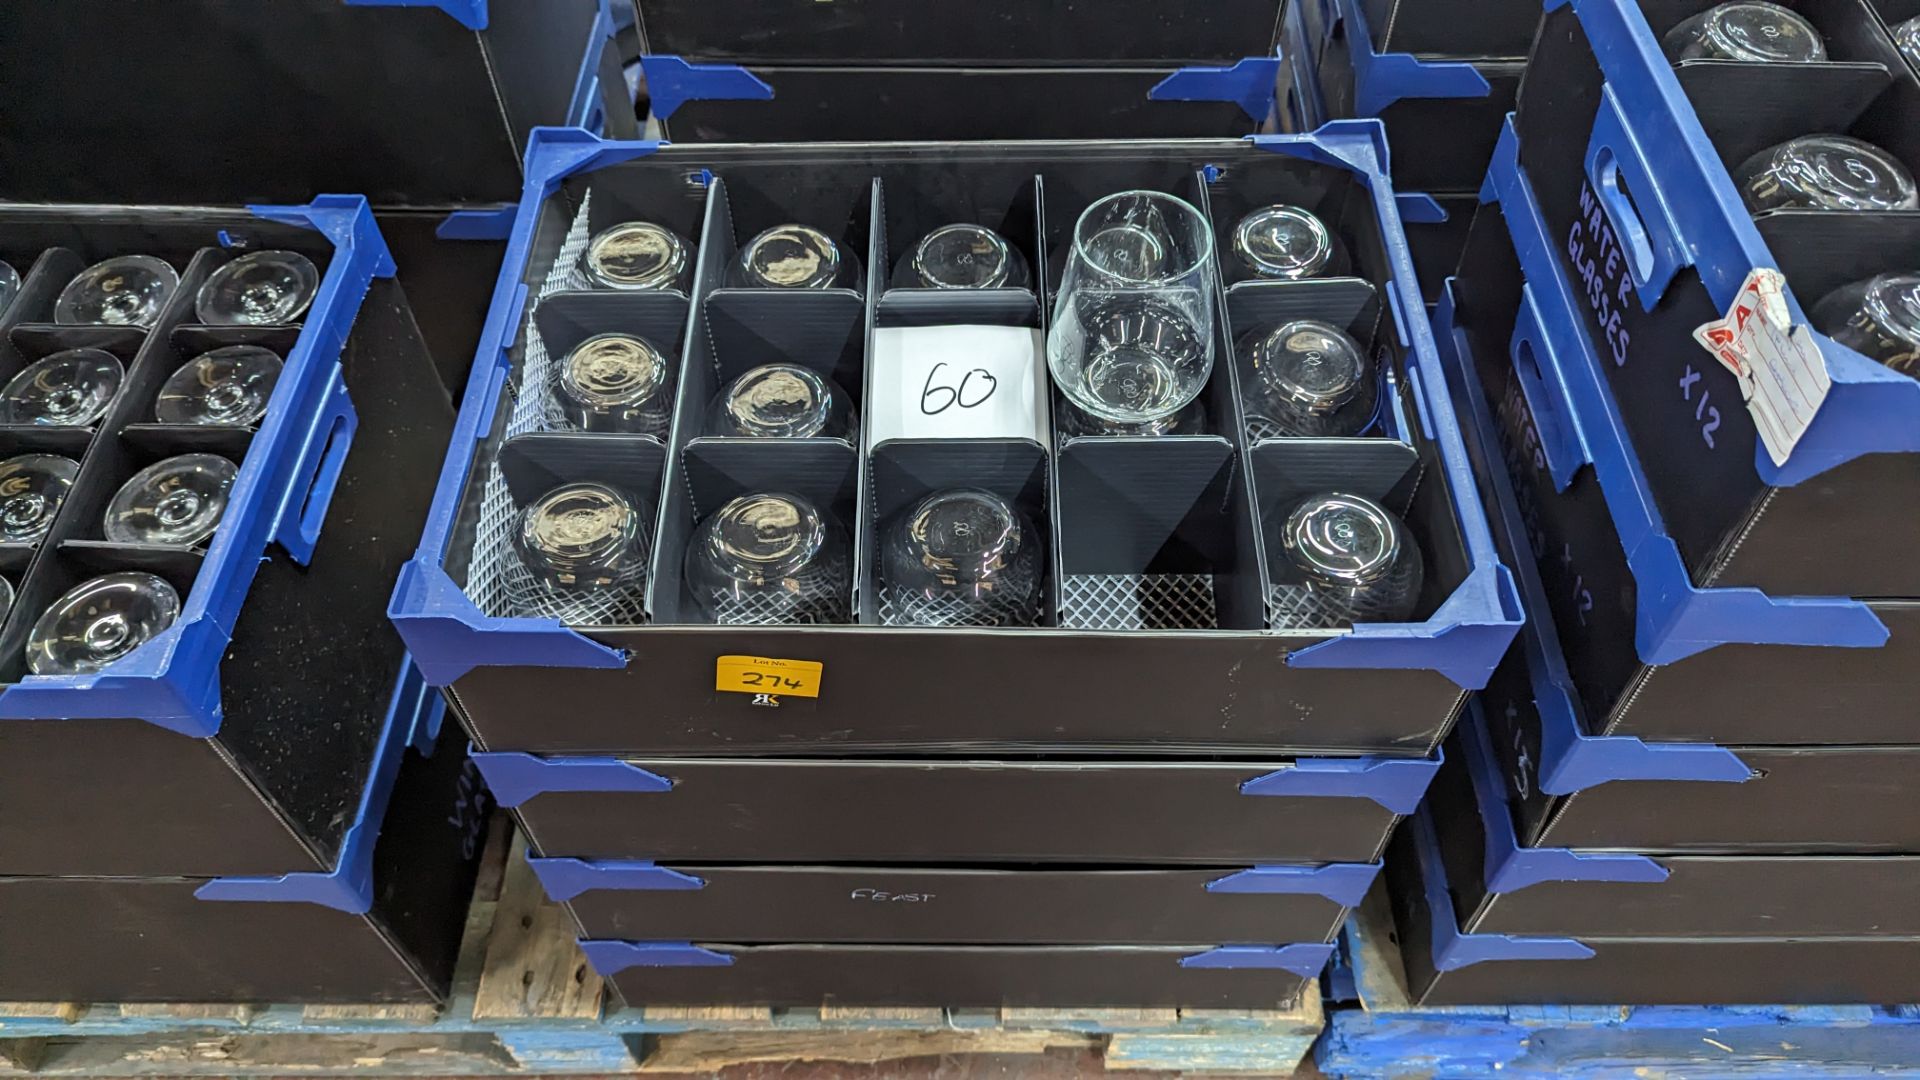 60 modern glass tumblers, in 4 transport trays, trays included